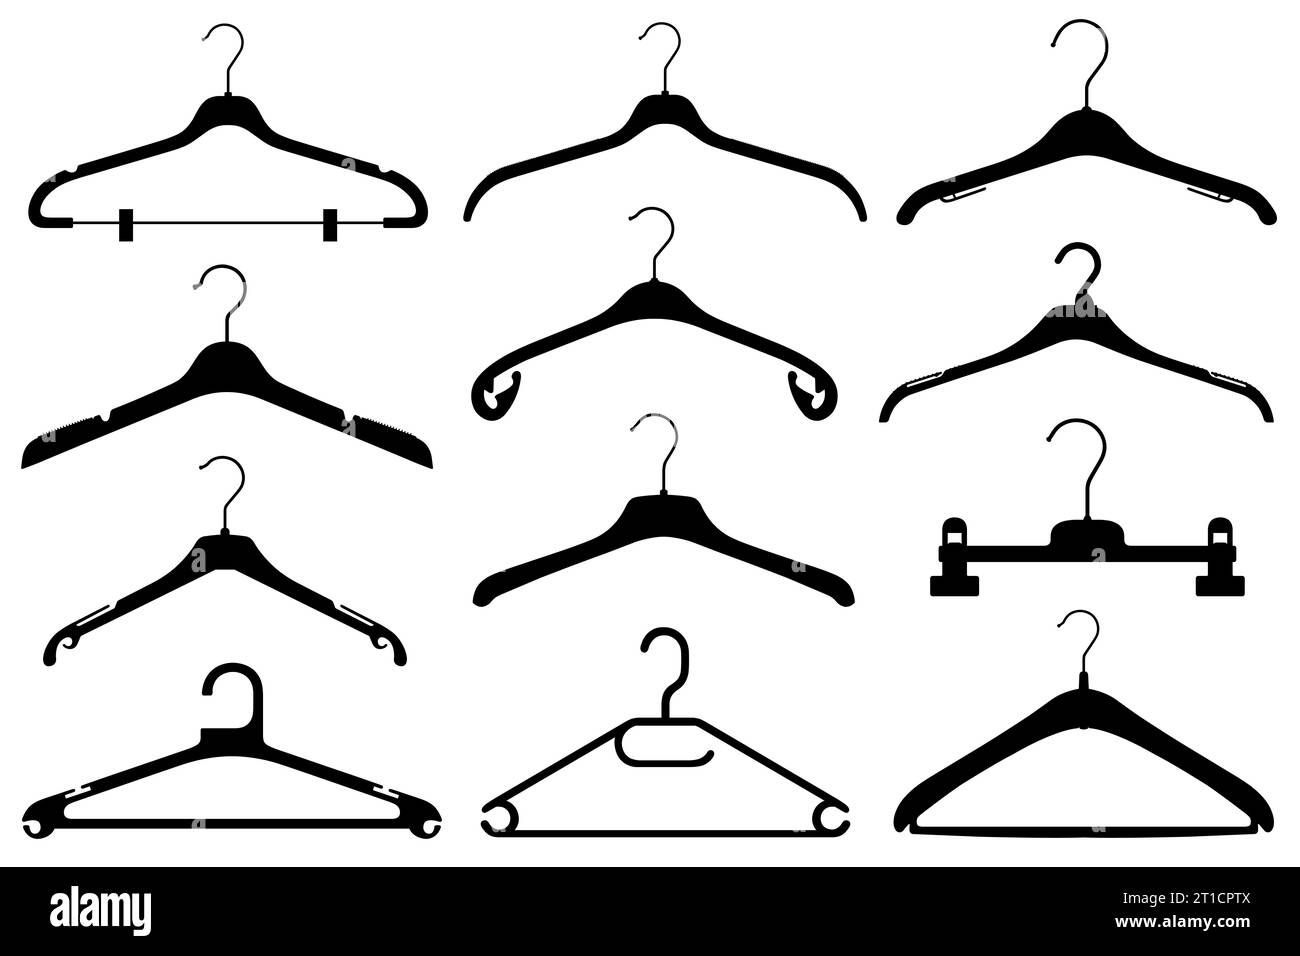 Illustration of different coat hangers isolated on white Stock Photo